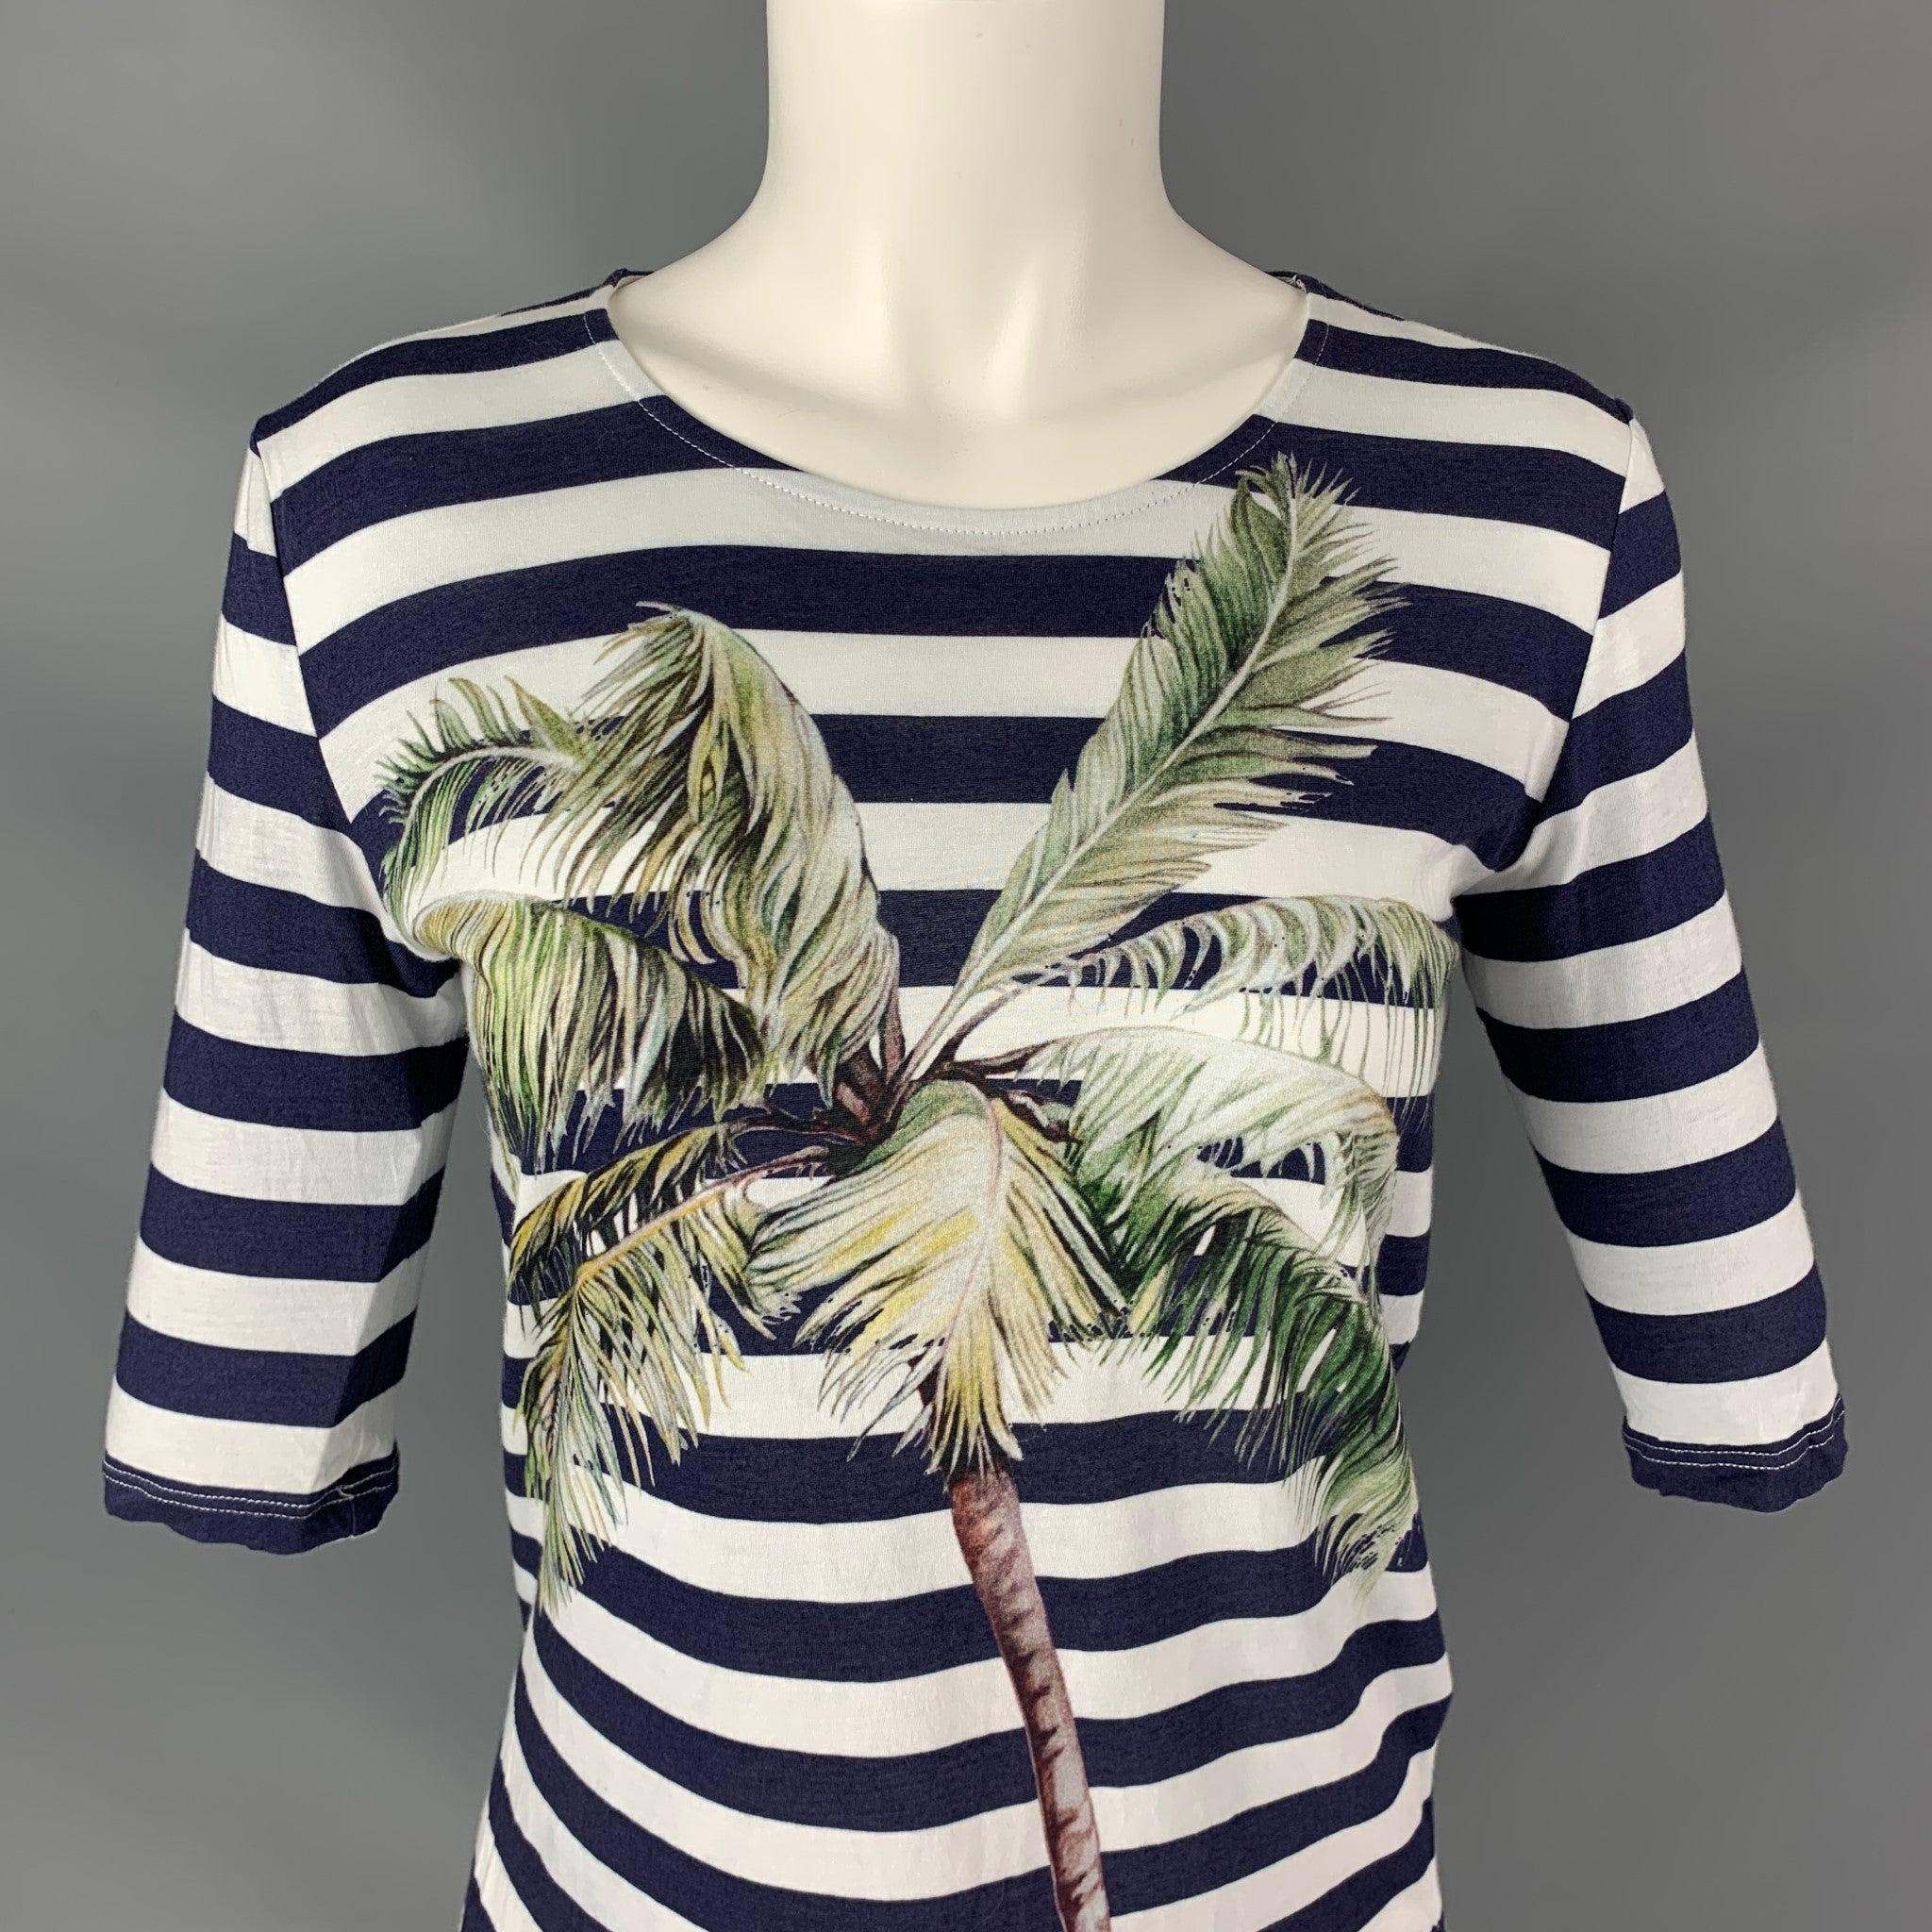 STELLA McCARTNEY t-shirt comes in a blue and white stripped cotton fabric features a palm tree graphic print. Made in Portugal.Very Good Pre-Owned Condition.
 Mark at brand tag. 

Marked:   40 

Measurements: 
 
Shoulder:16 inBust: 36 inSleeve: 12